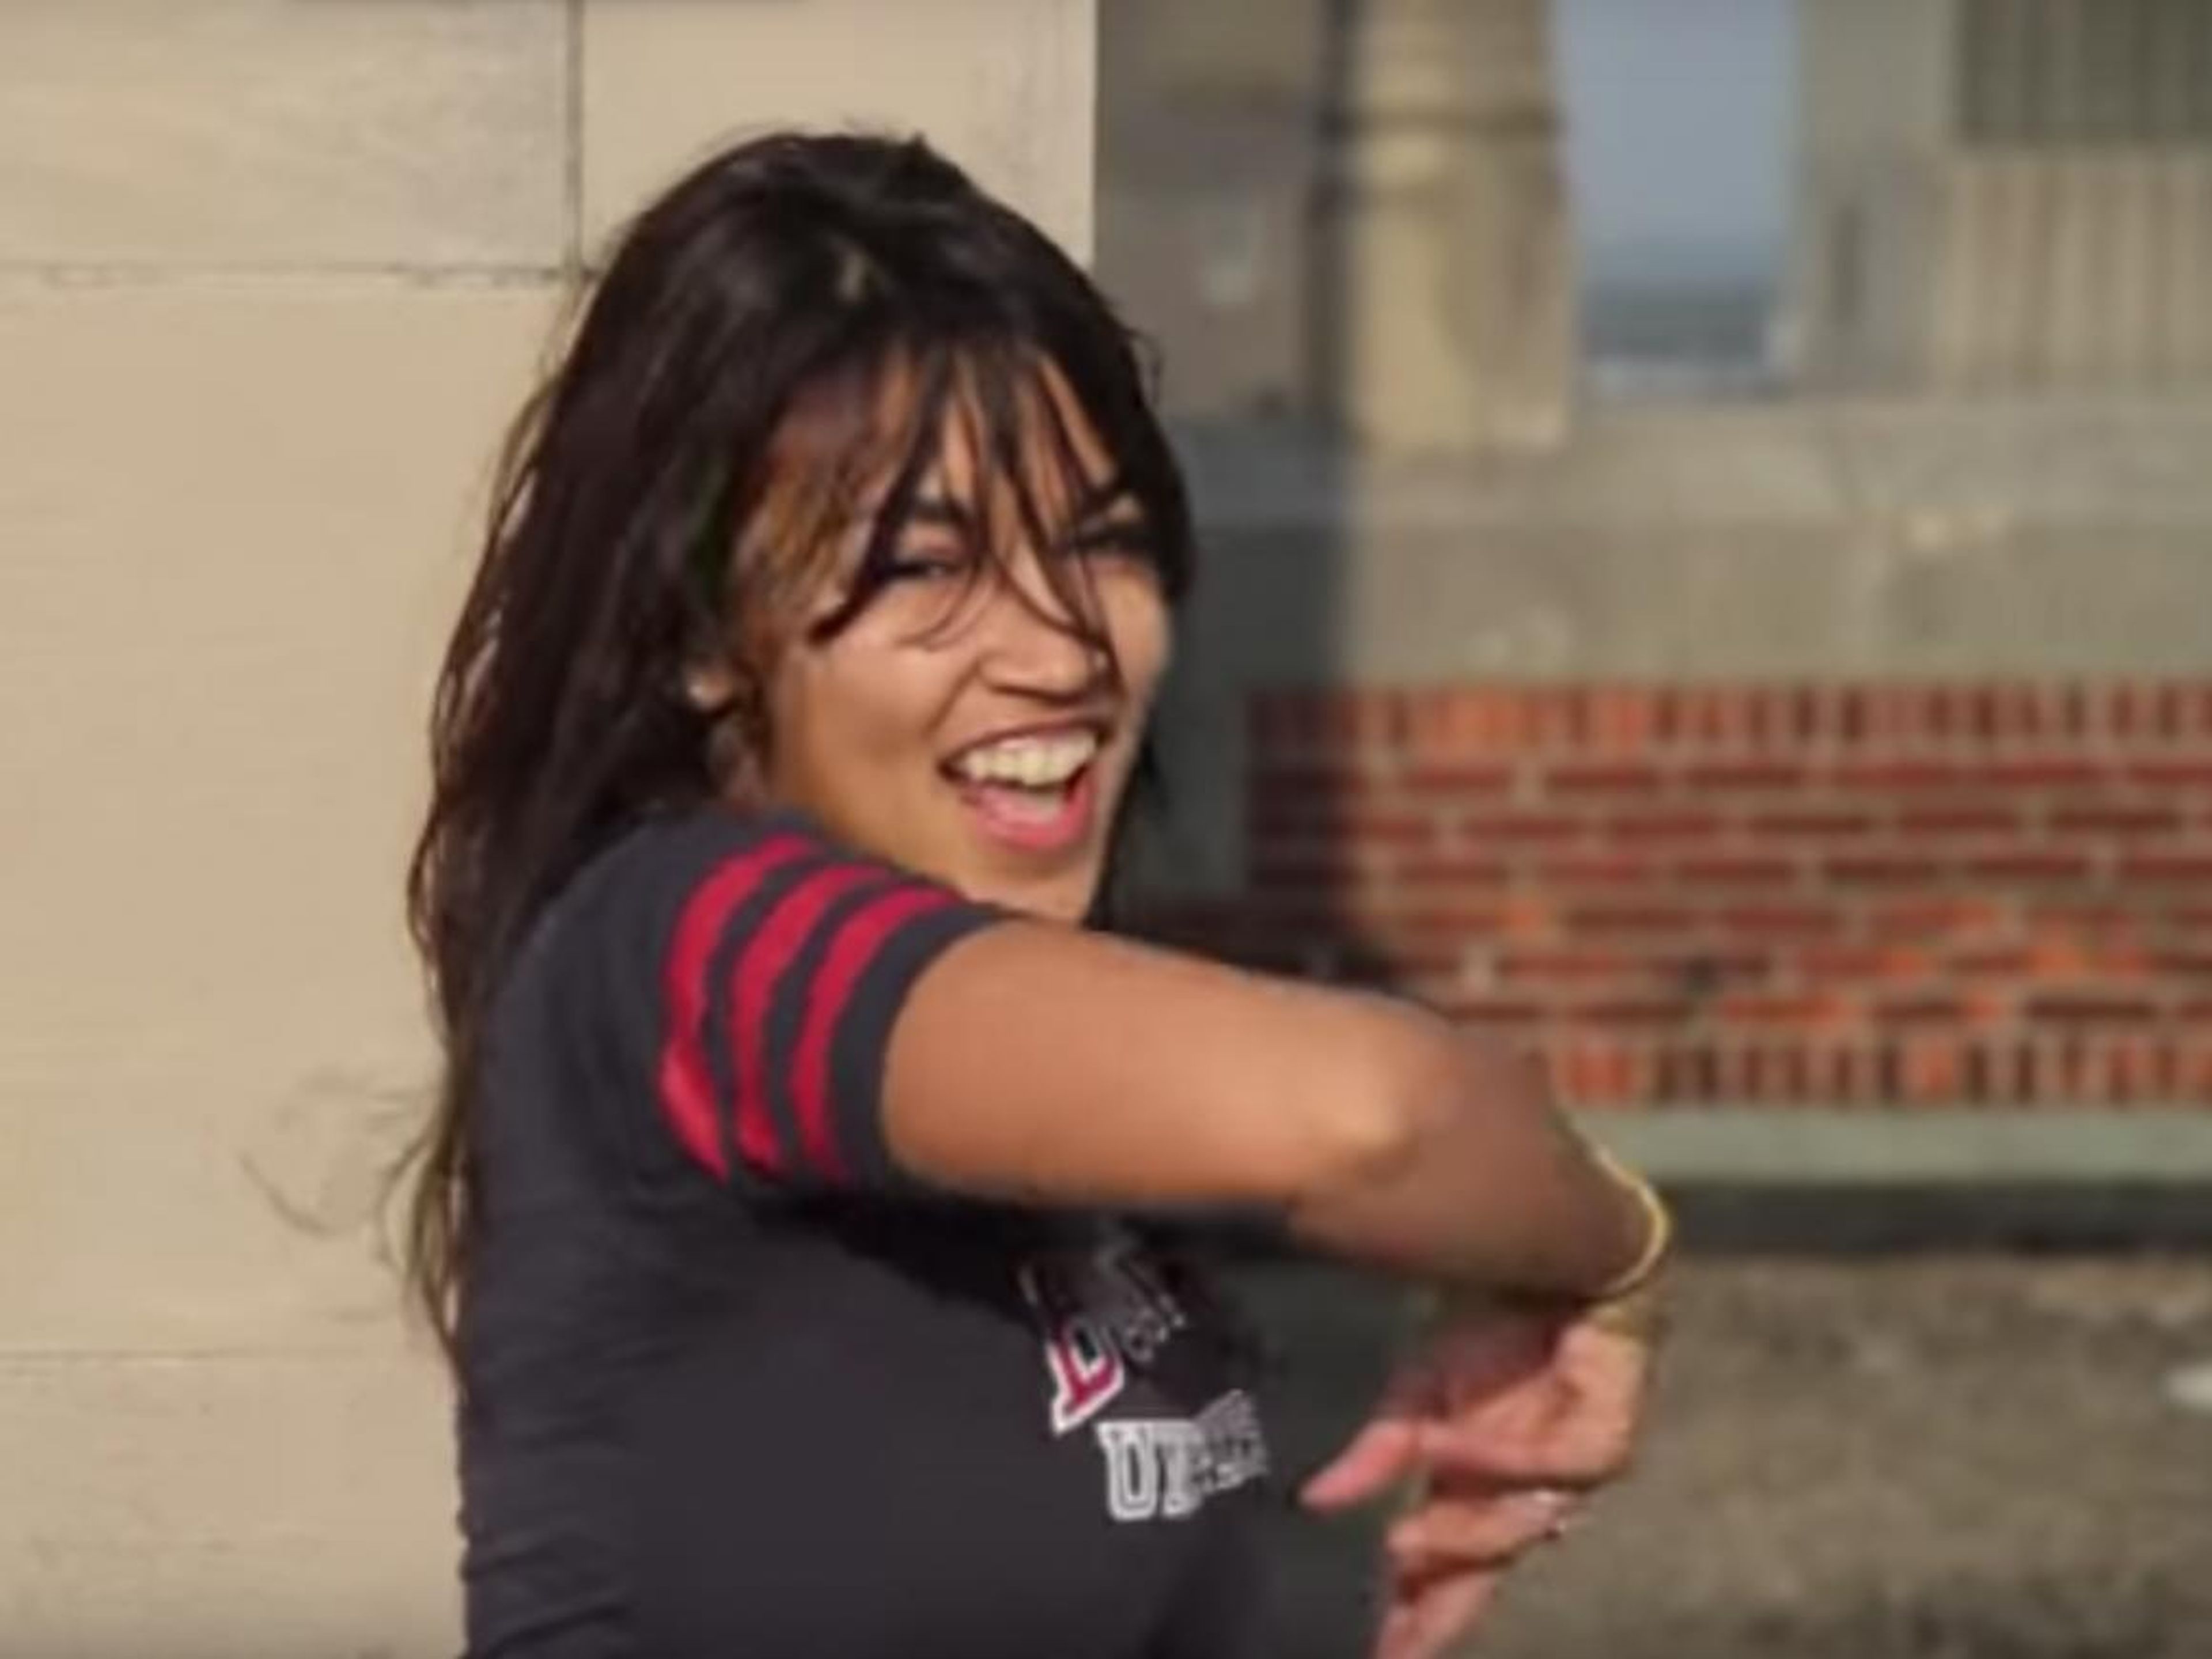 A still from the video of Alexandria Ocasio-Cortez dancing in college.